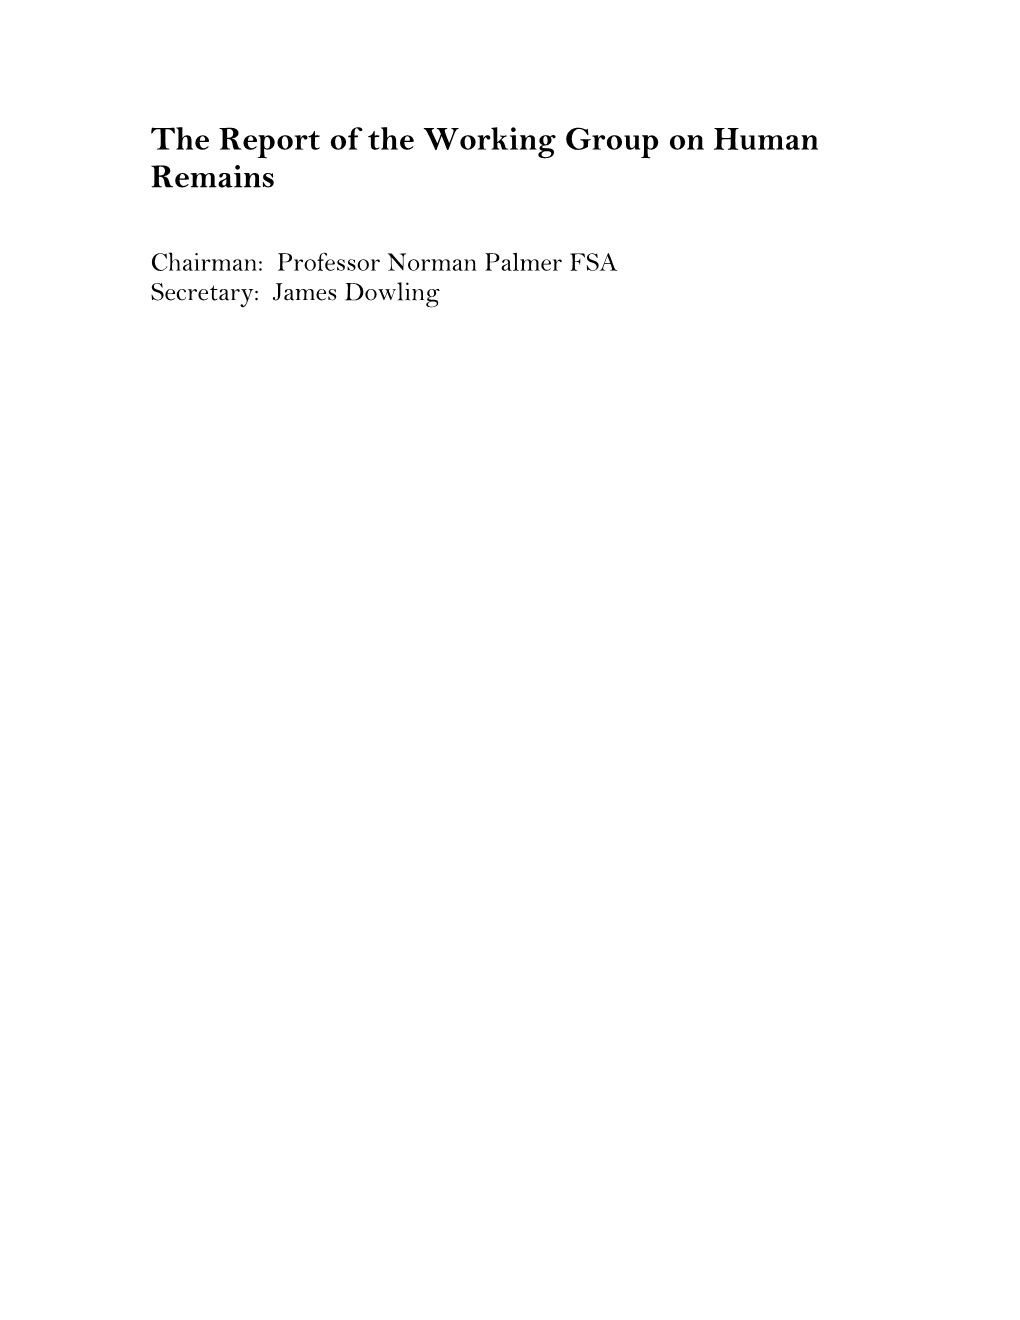 The Report of the Working Group on Human Remains